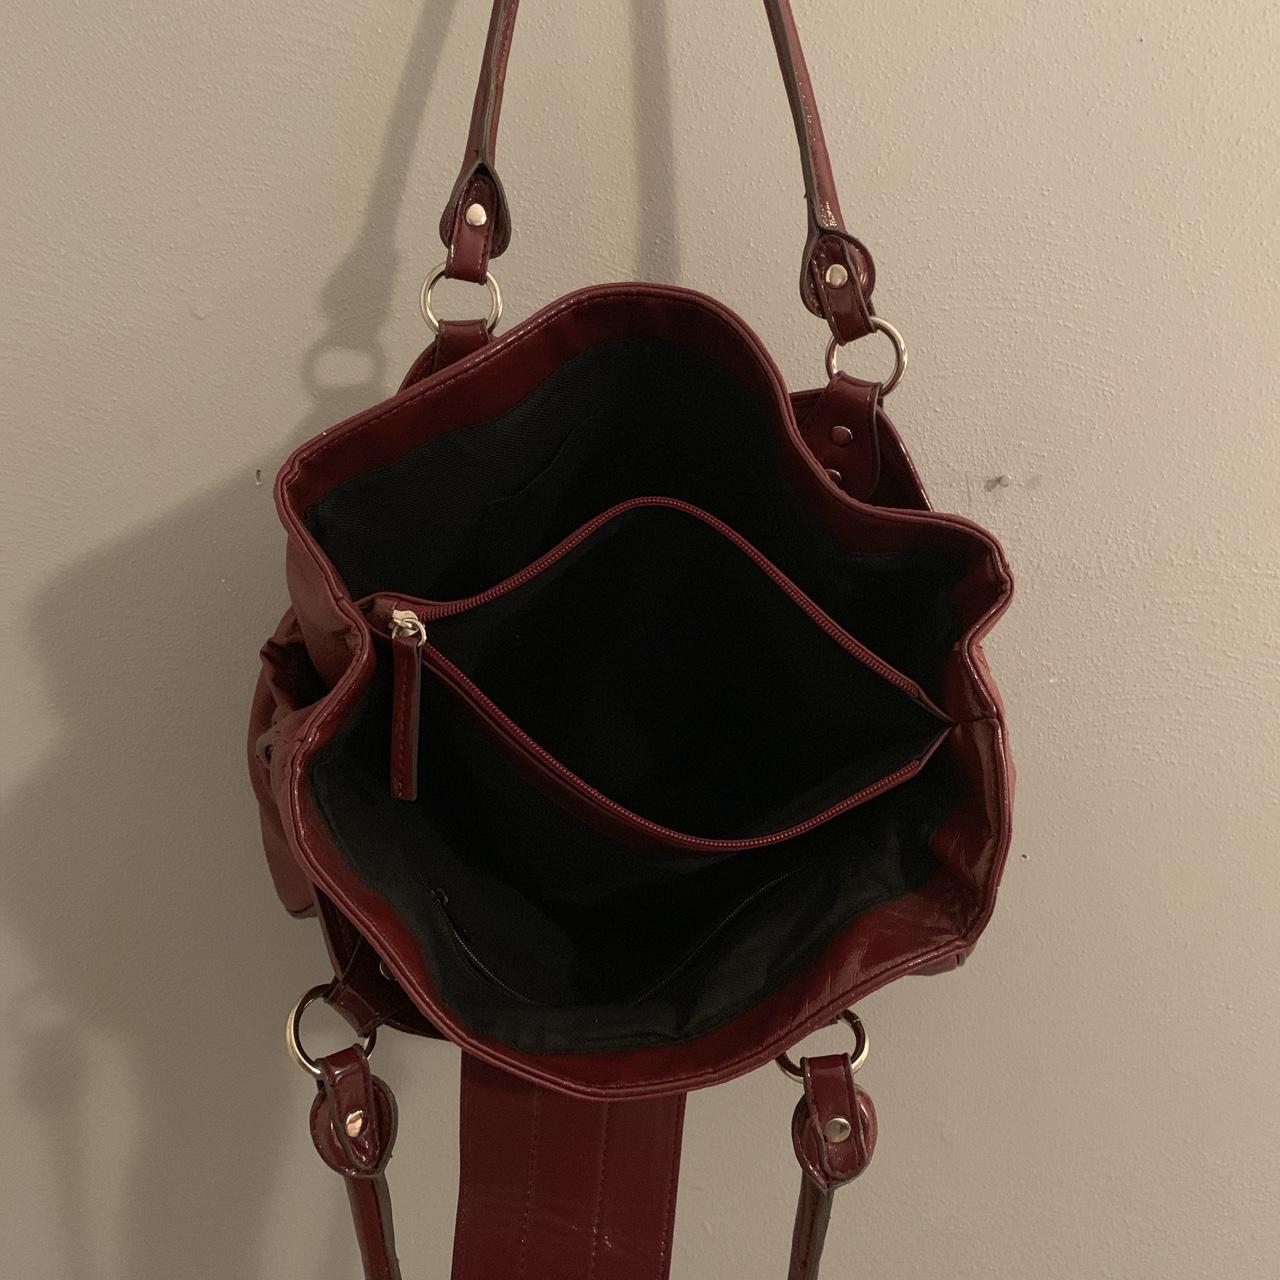 Stone Mountain Washed Leather Irene Hobo Bag - JCPenney